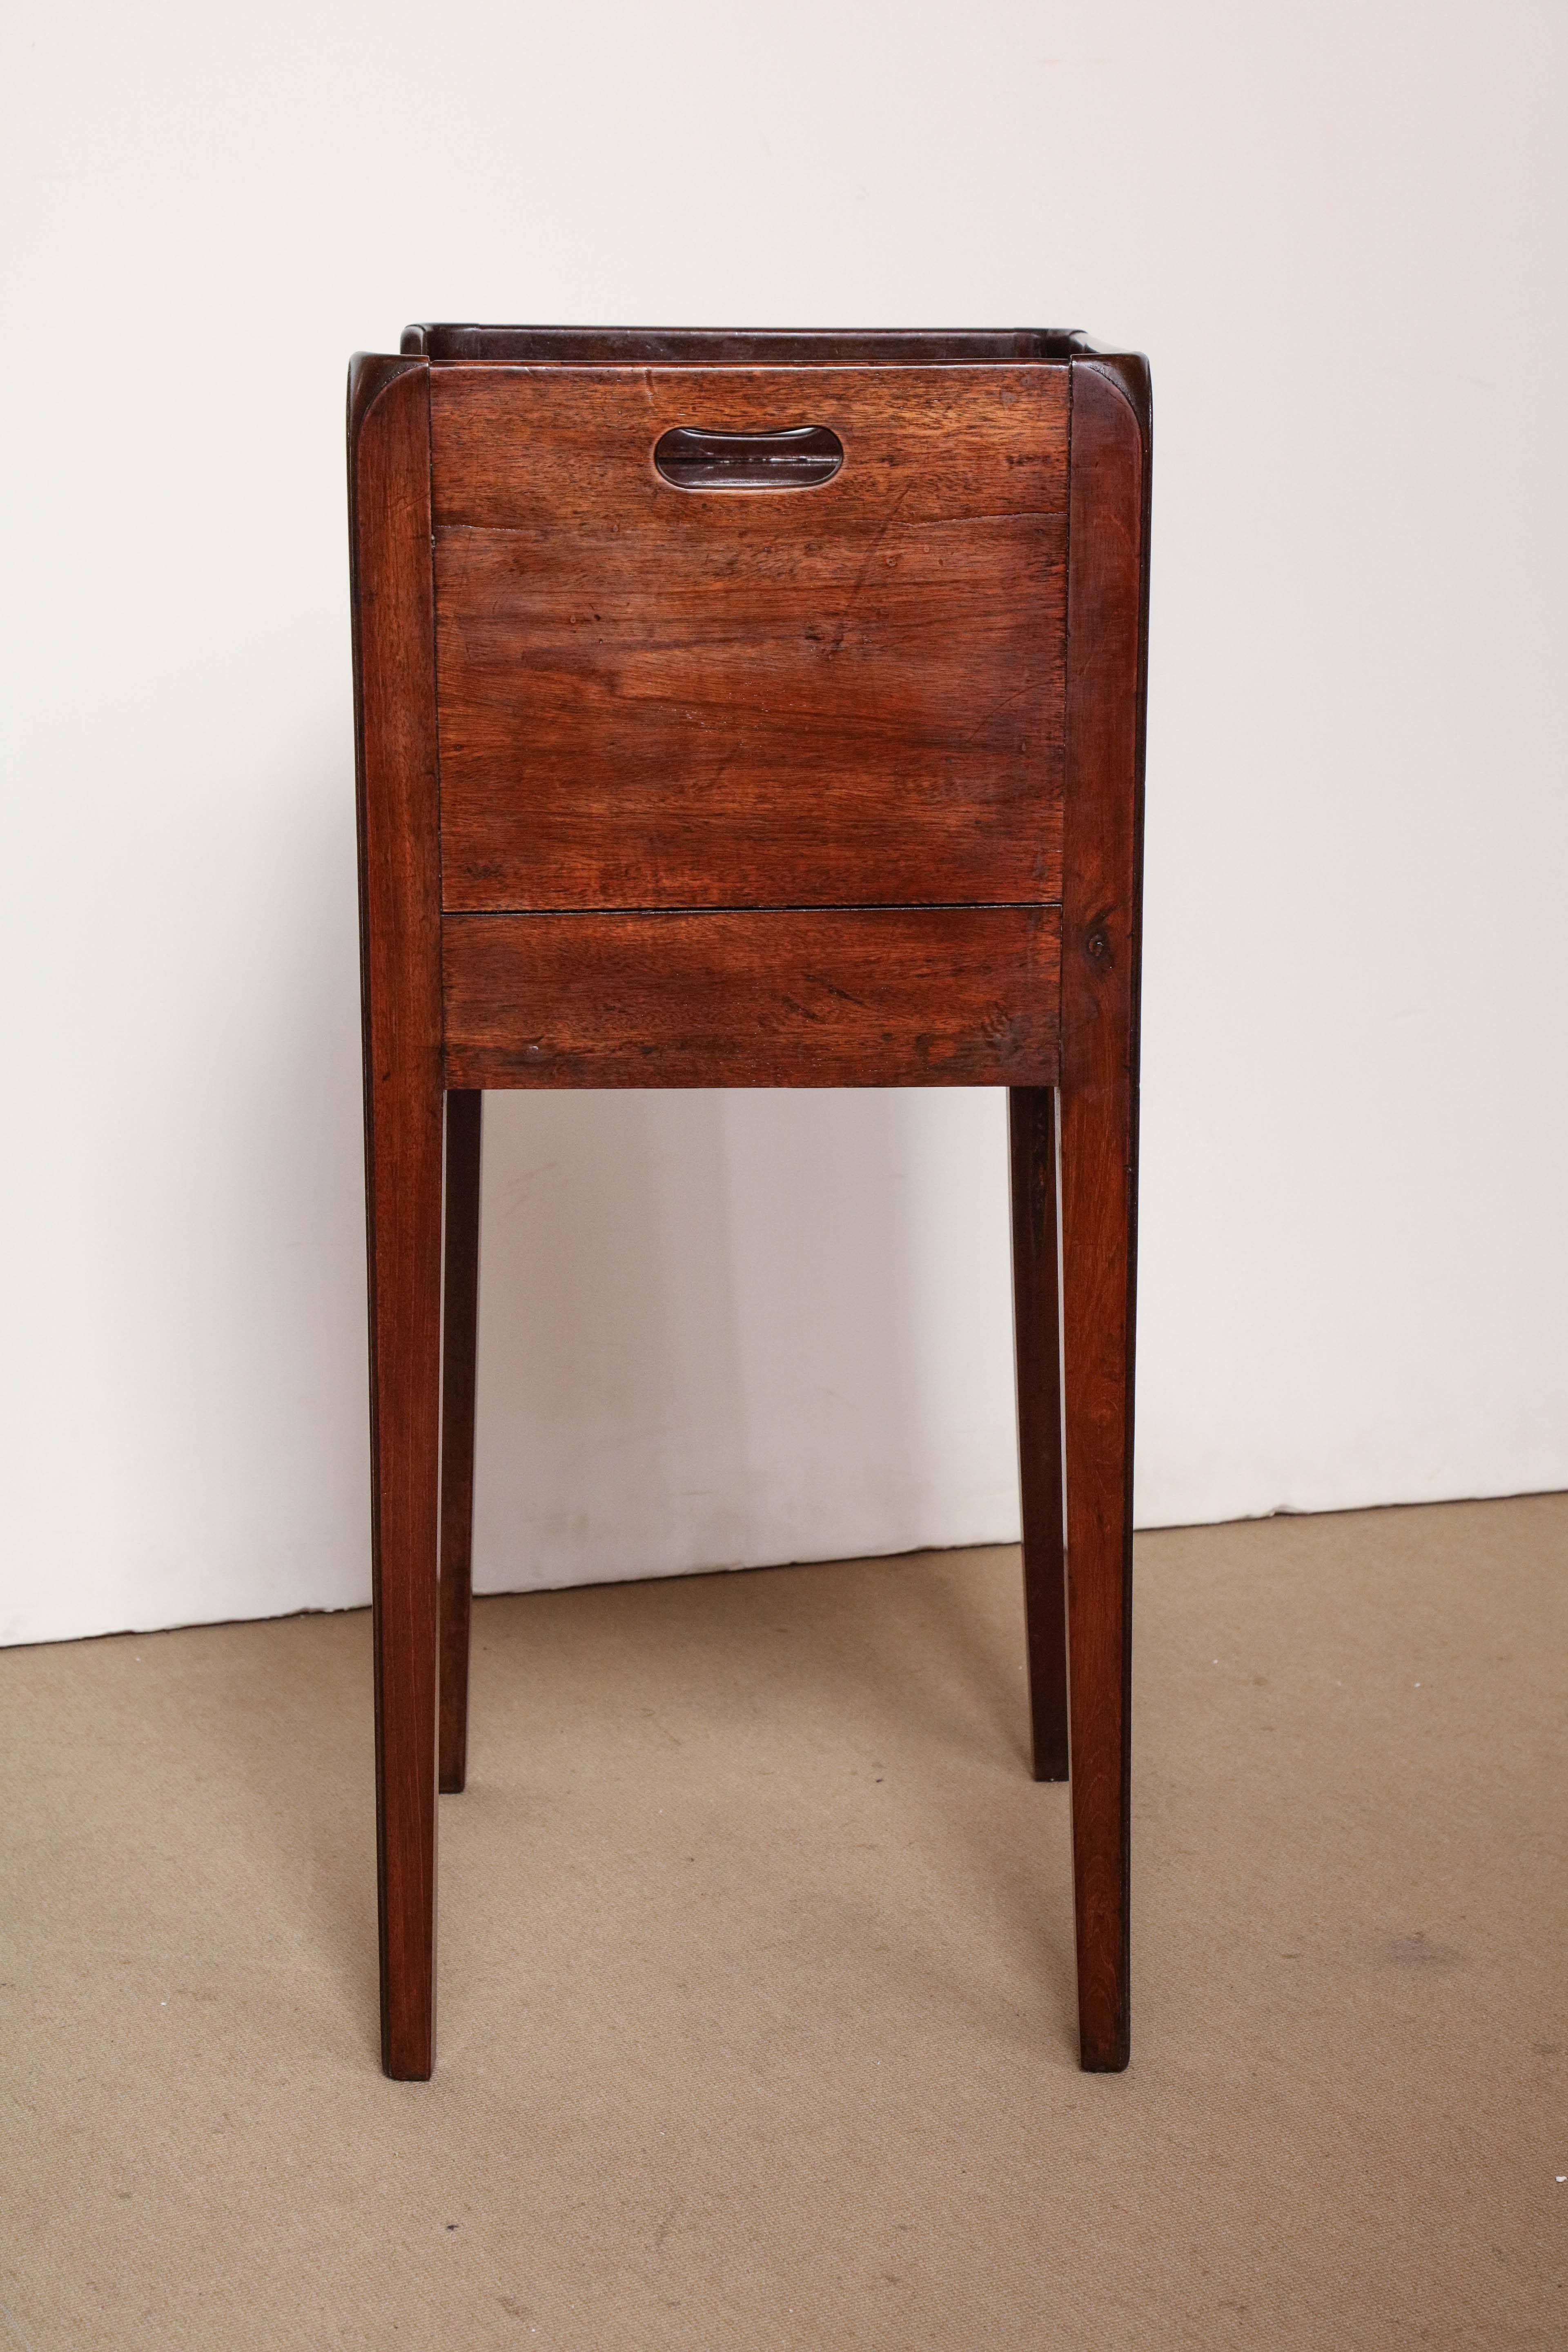 Early 19th Century English, Tambour Door Mahogany Table For Sale 2